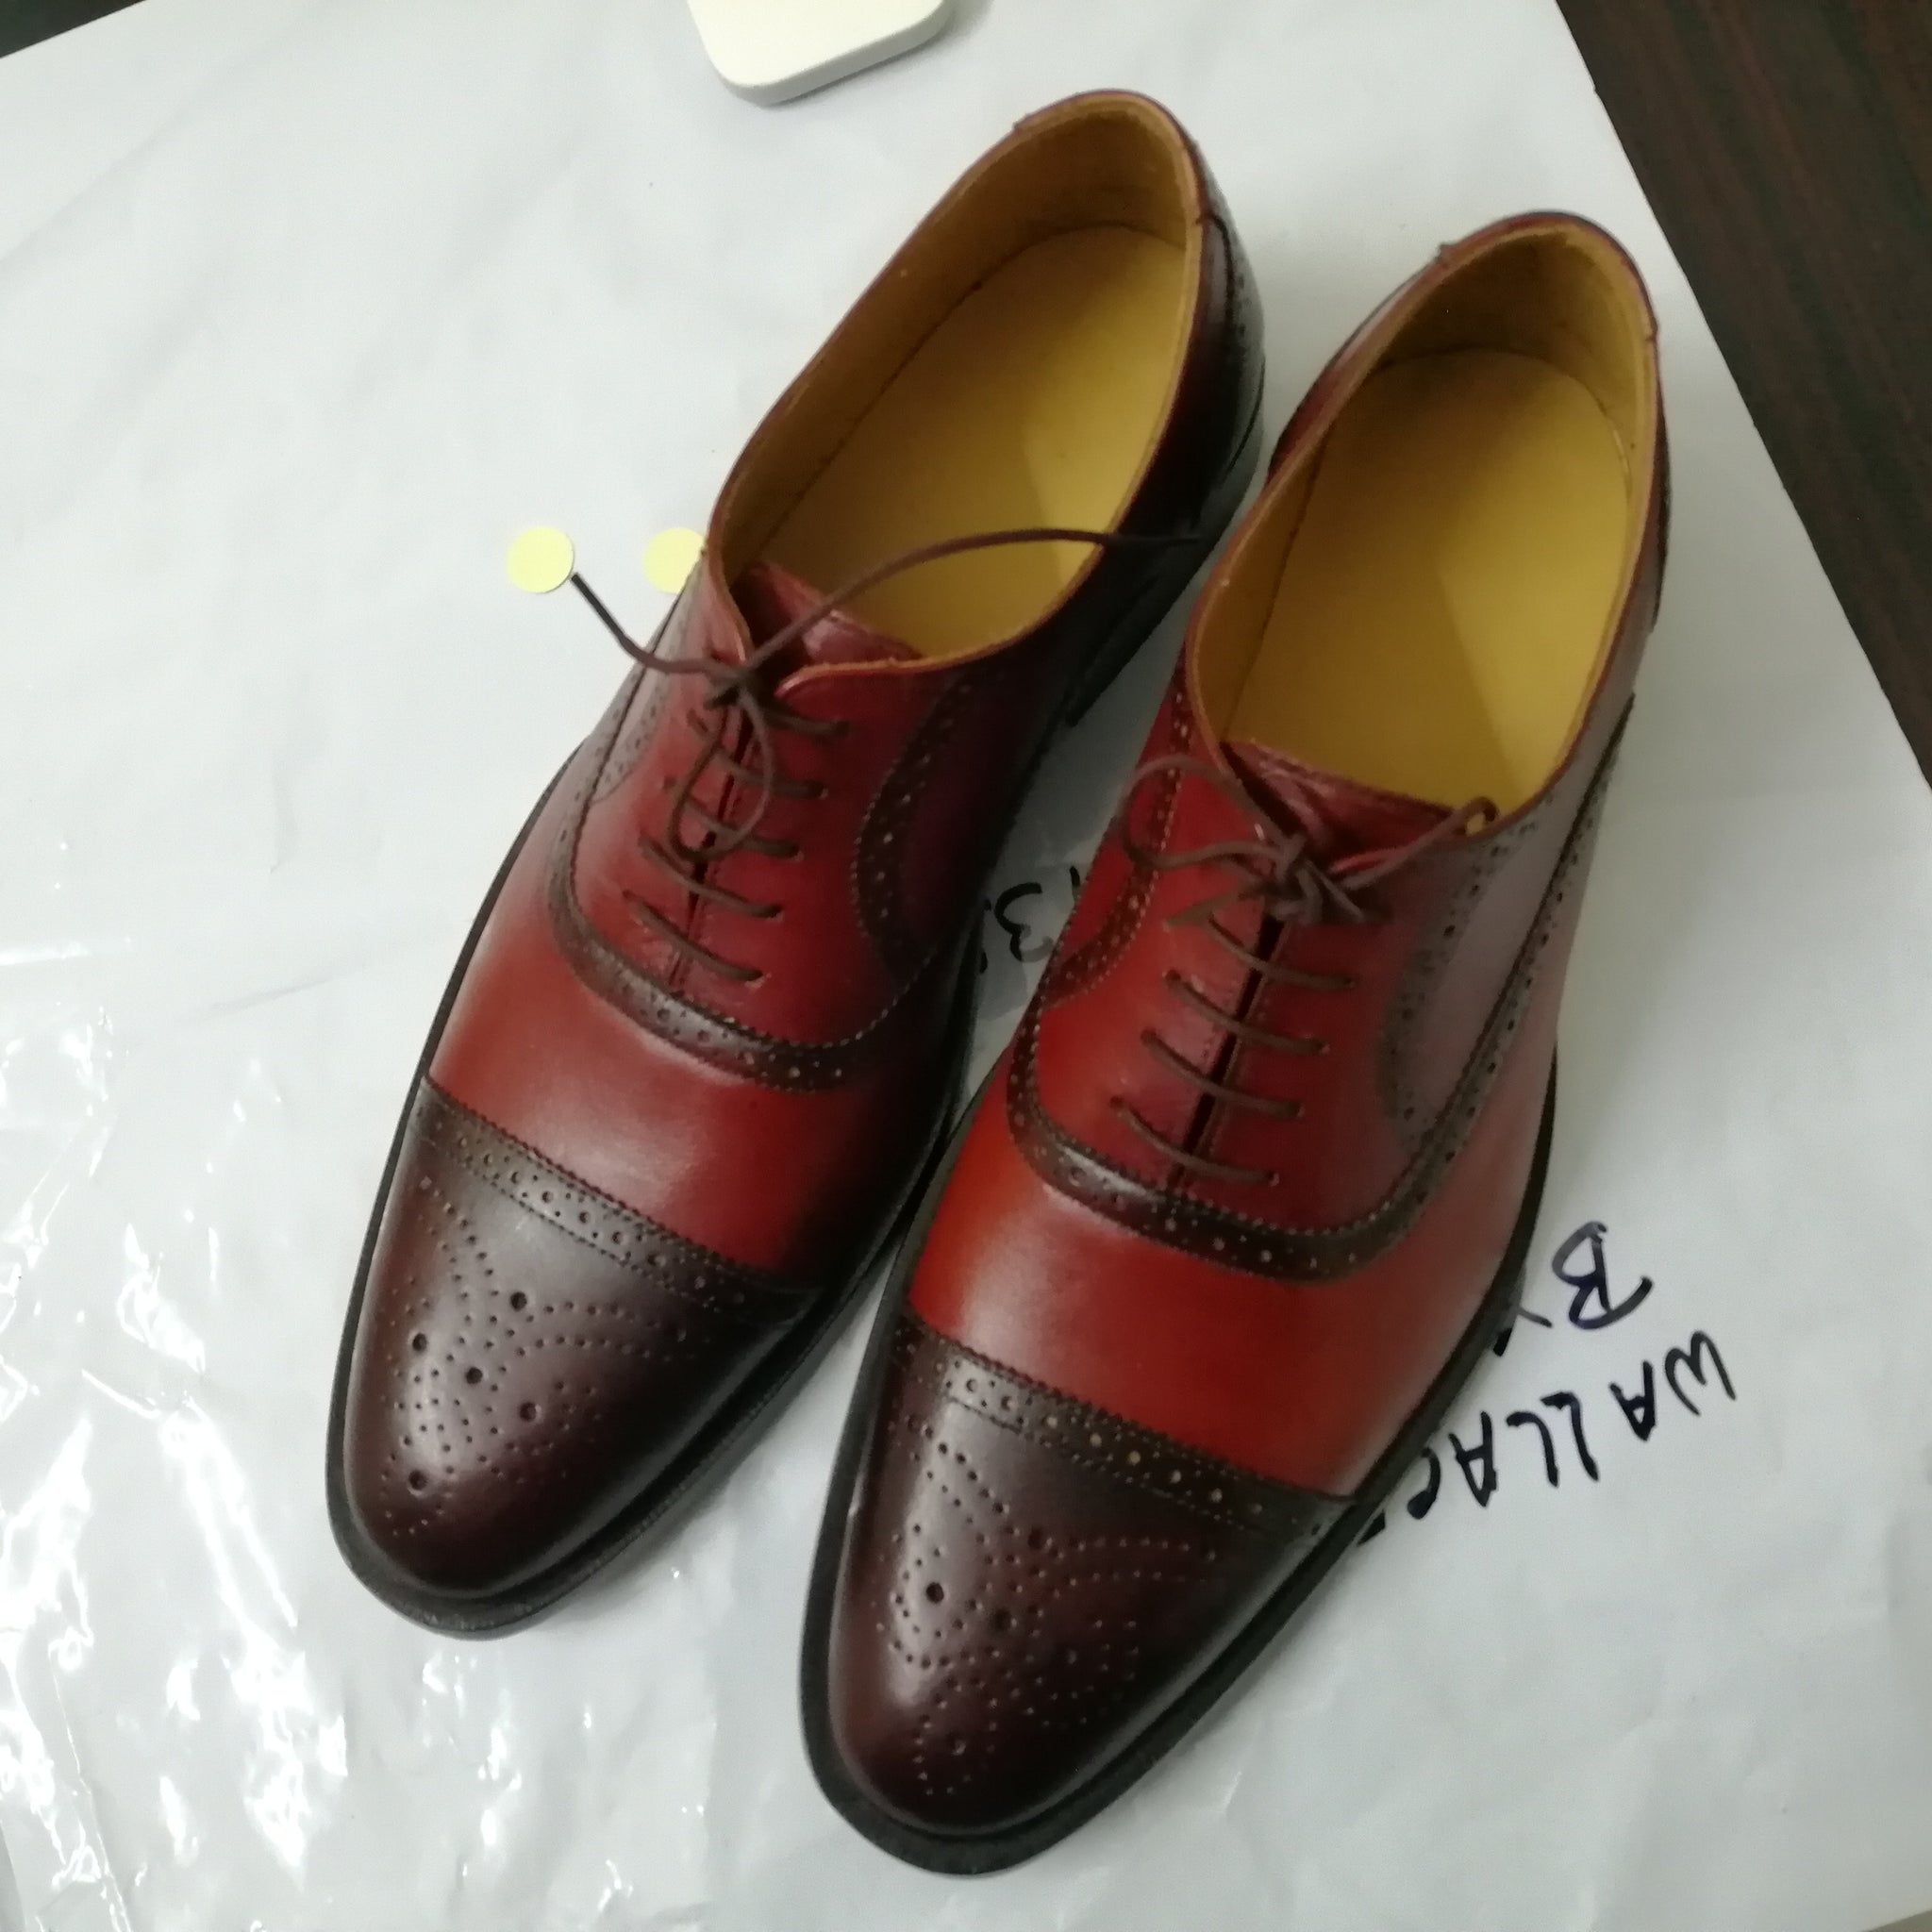 Handmade Men's Two Tone Tan Brown Cap Toe Brogue Leather Lace Up Shoes, Men Designer Dress Formal Luxury Shoes - theleathersouq